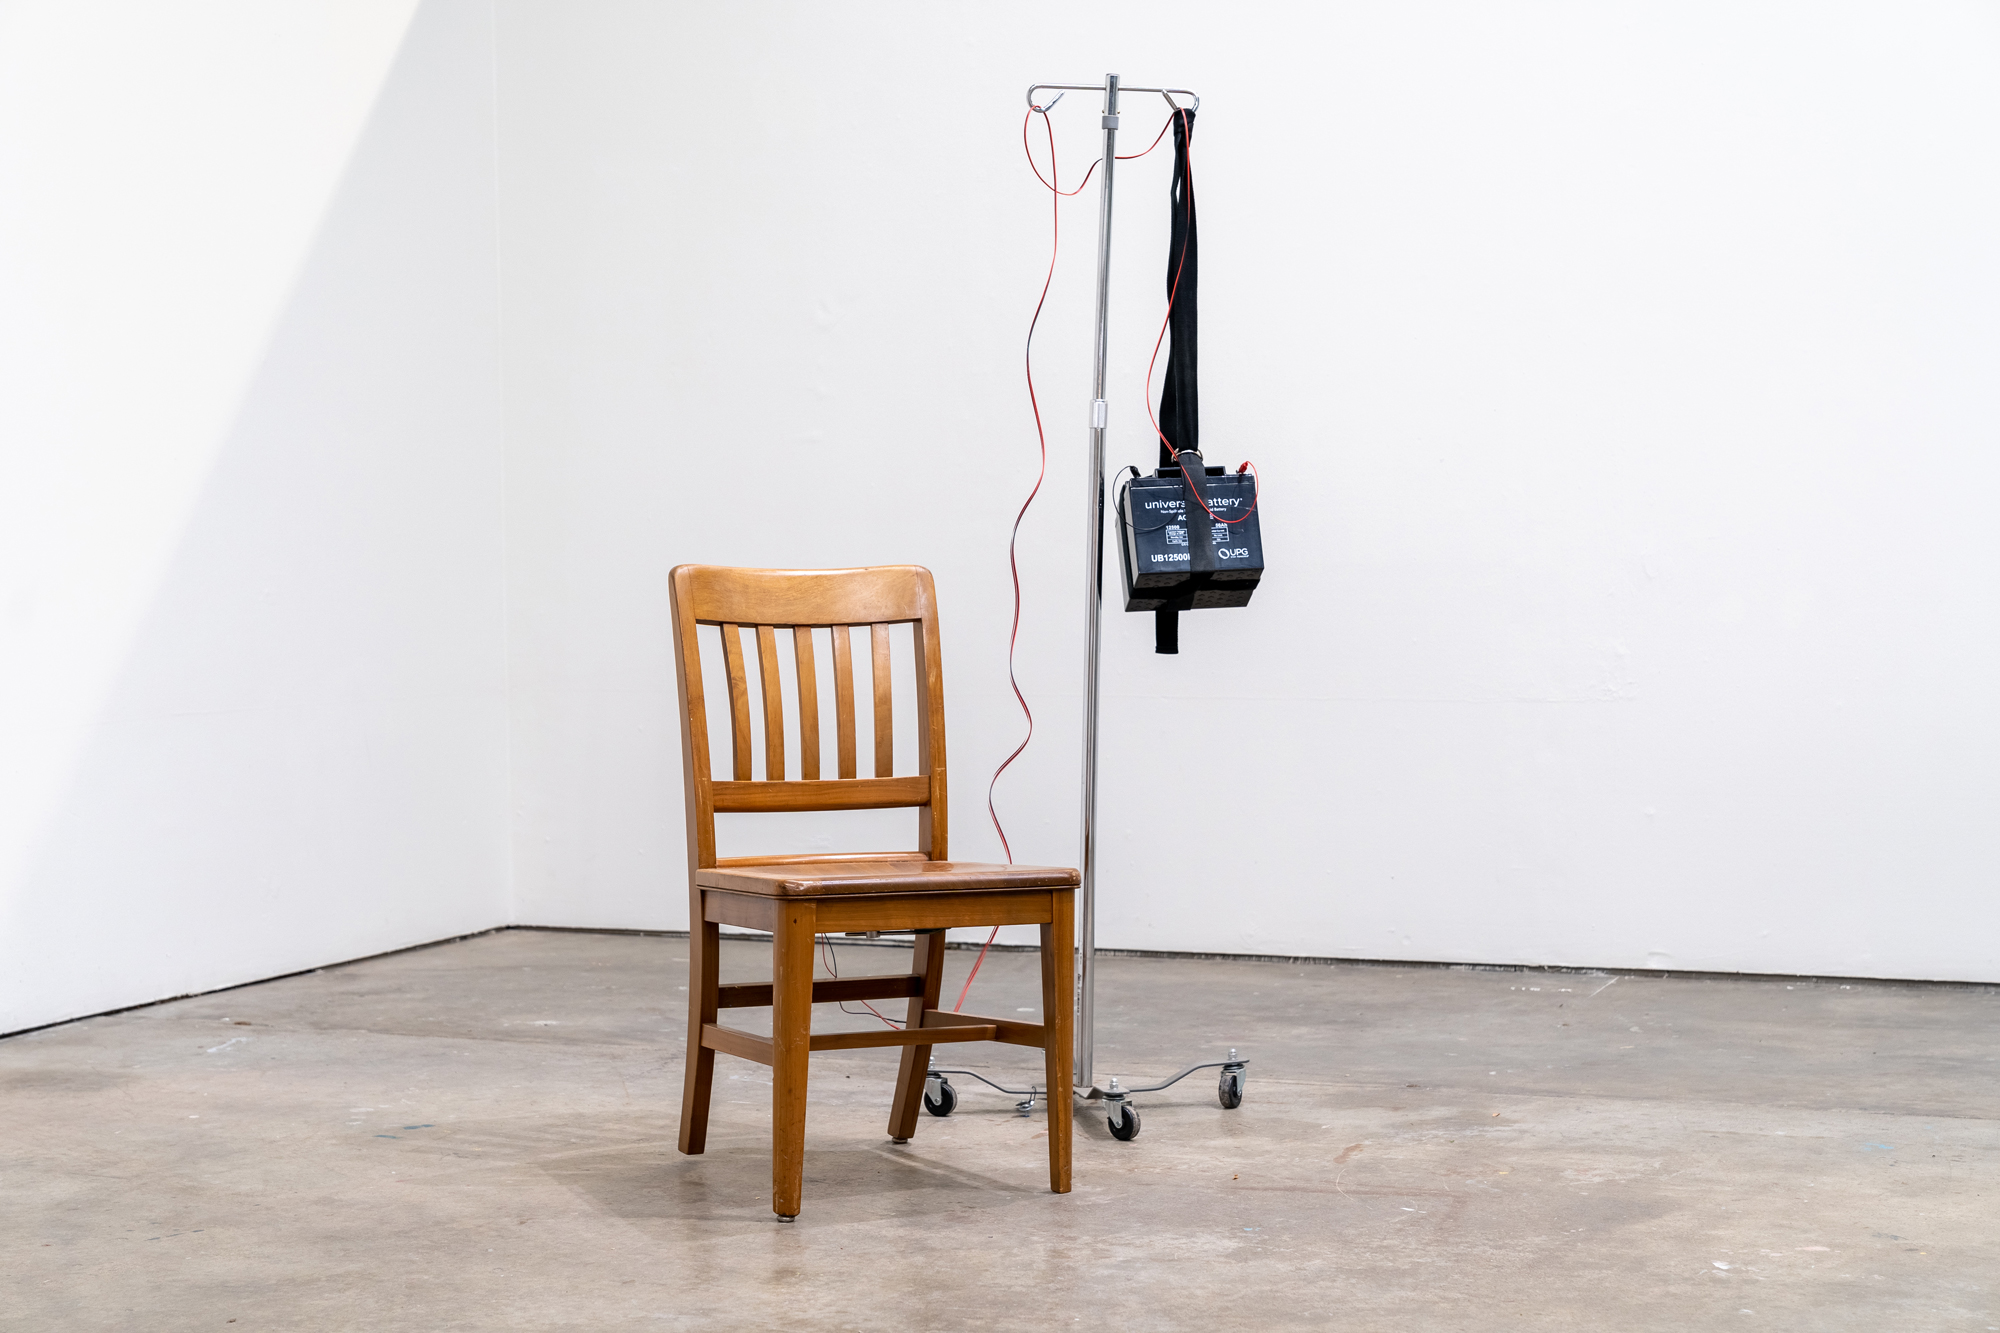 A wooden chair with an IV rack next to it, wire and a car battery hanging from its metal arms